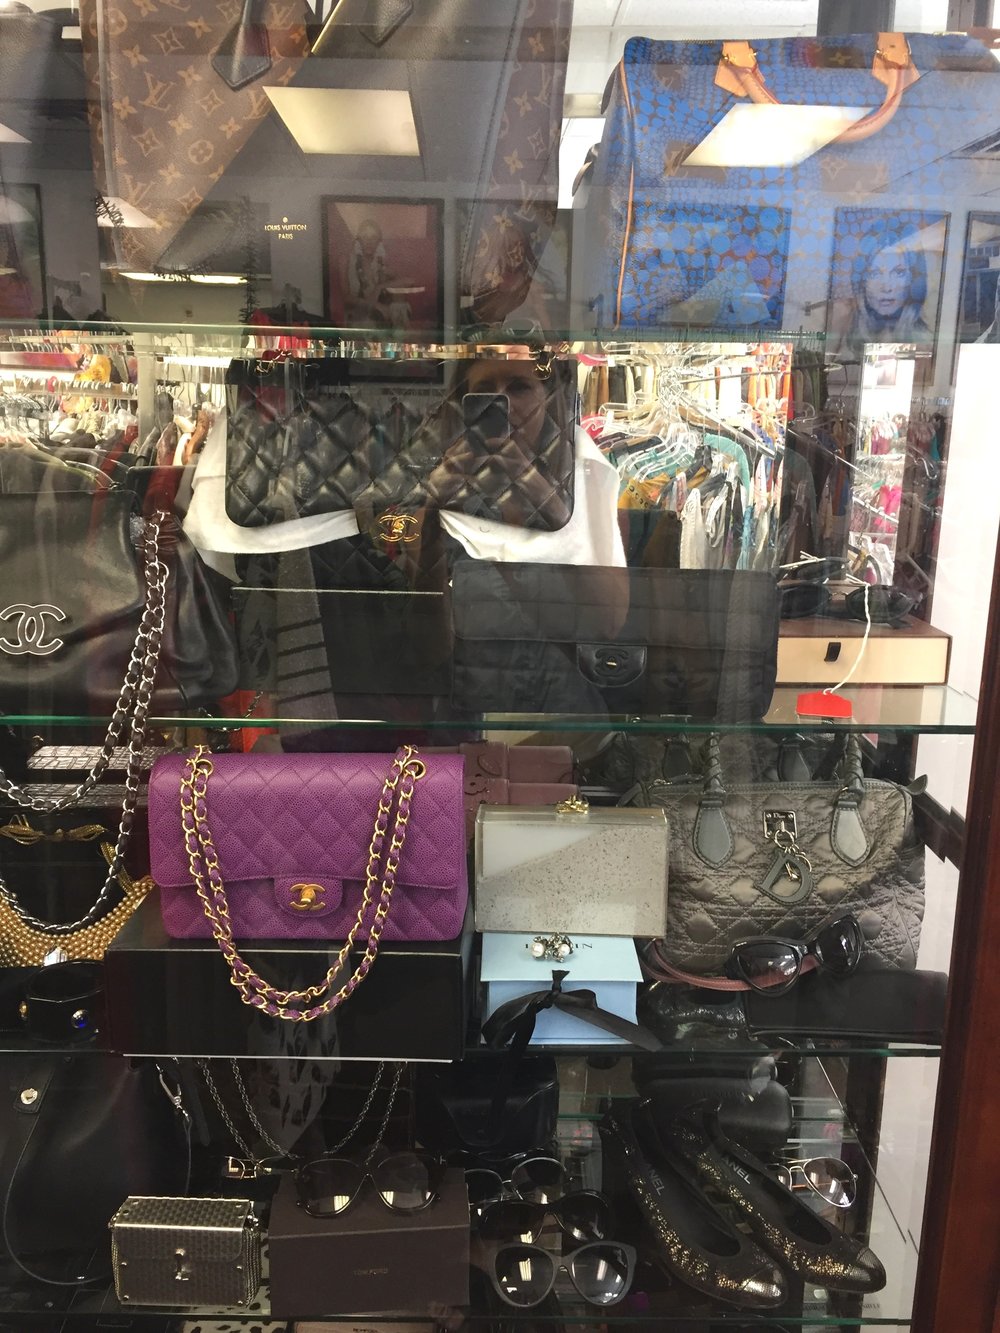 The Best Vintage Stores and Thrift Stores in Baltimore - TF